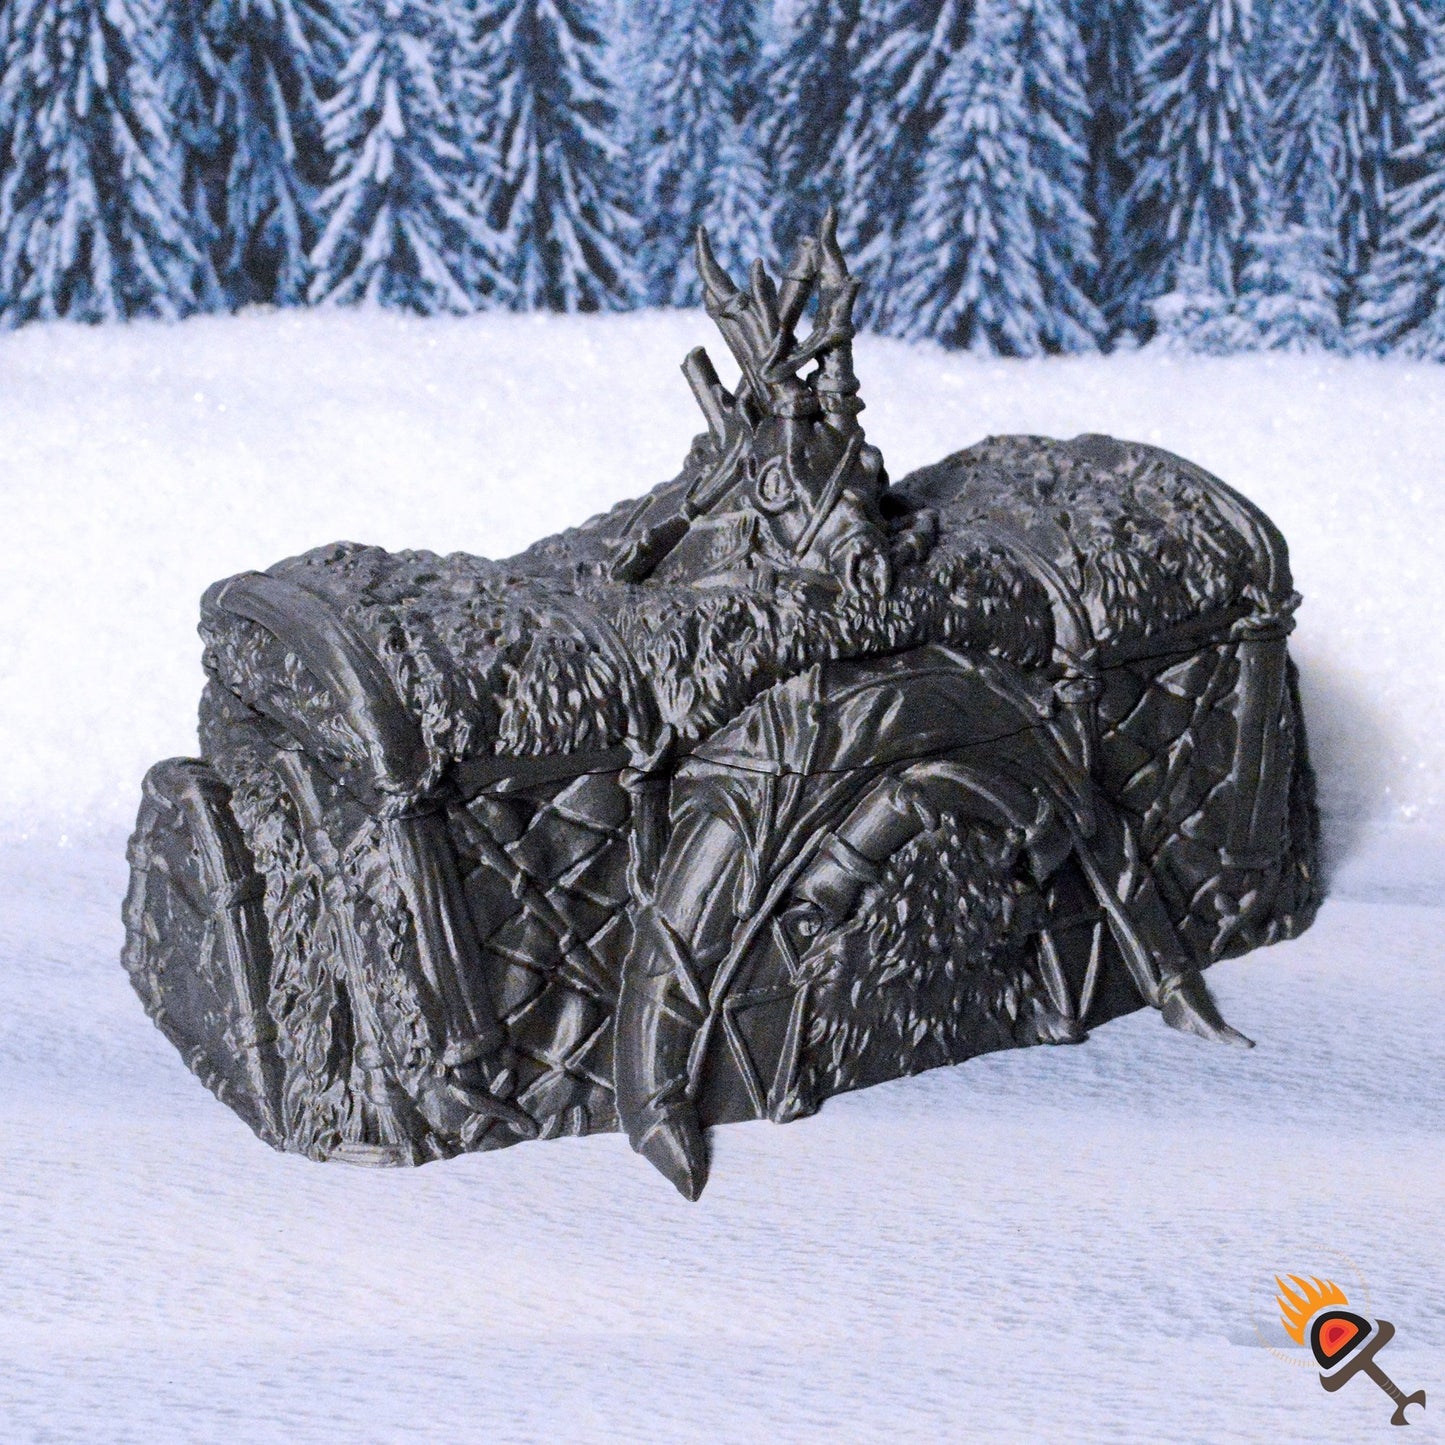 Chieftan's Hut 15mm 28mm 32mm for D&D Icewind Dale Terrain, DnD Pathfinder Frozen Snowy Icy Tribal Arctic Camp